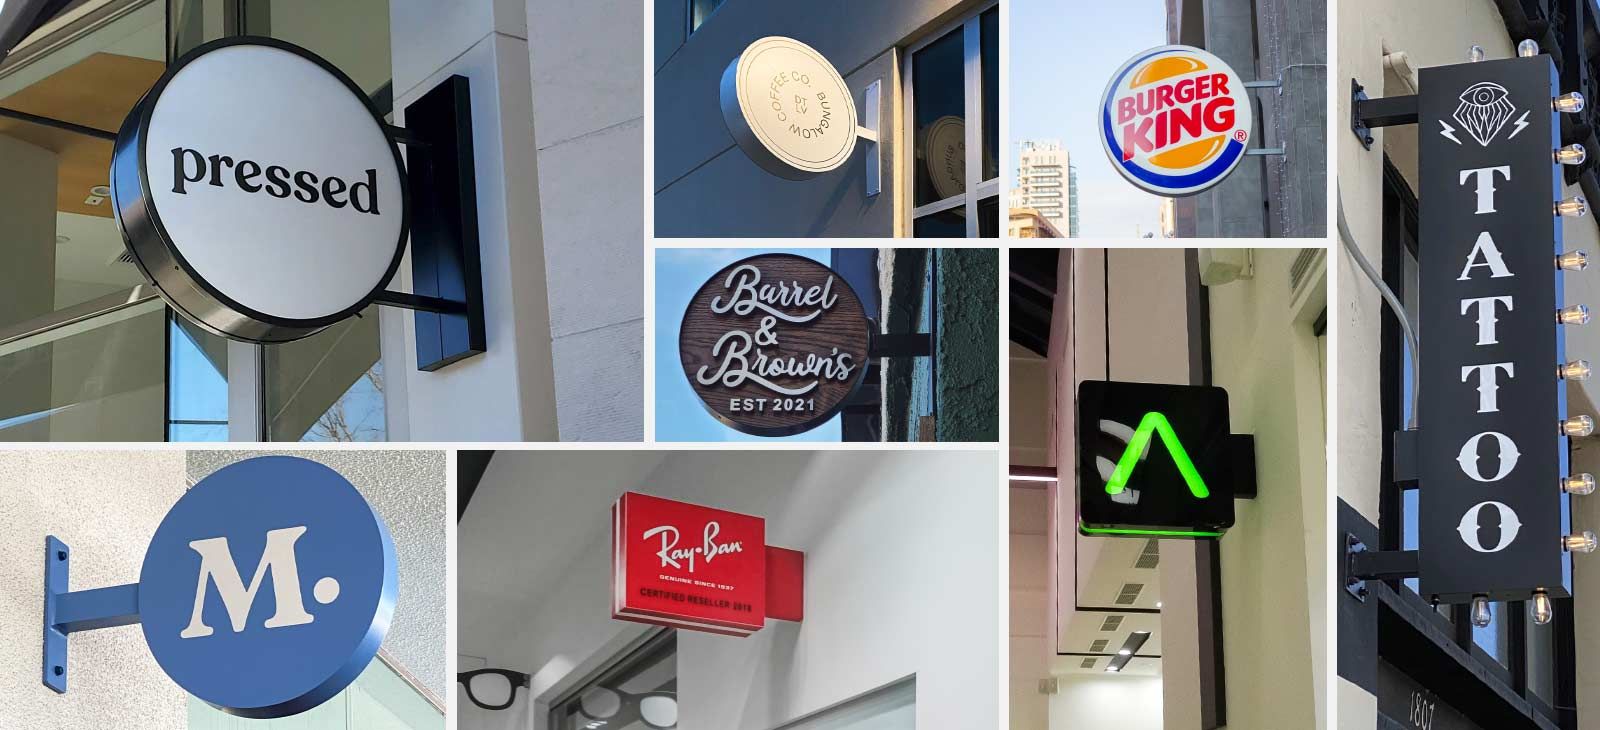 Blade sign displays in round and square shapes displaying brand names and logos outdoors